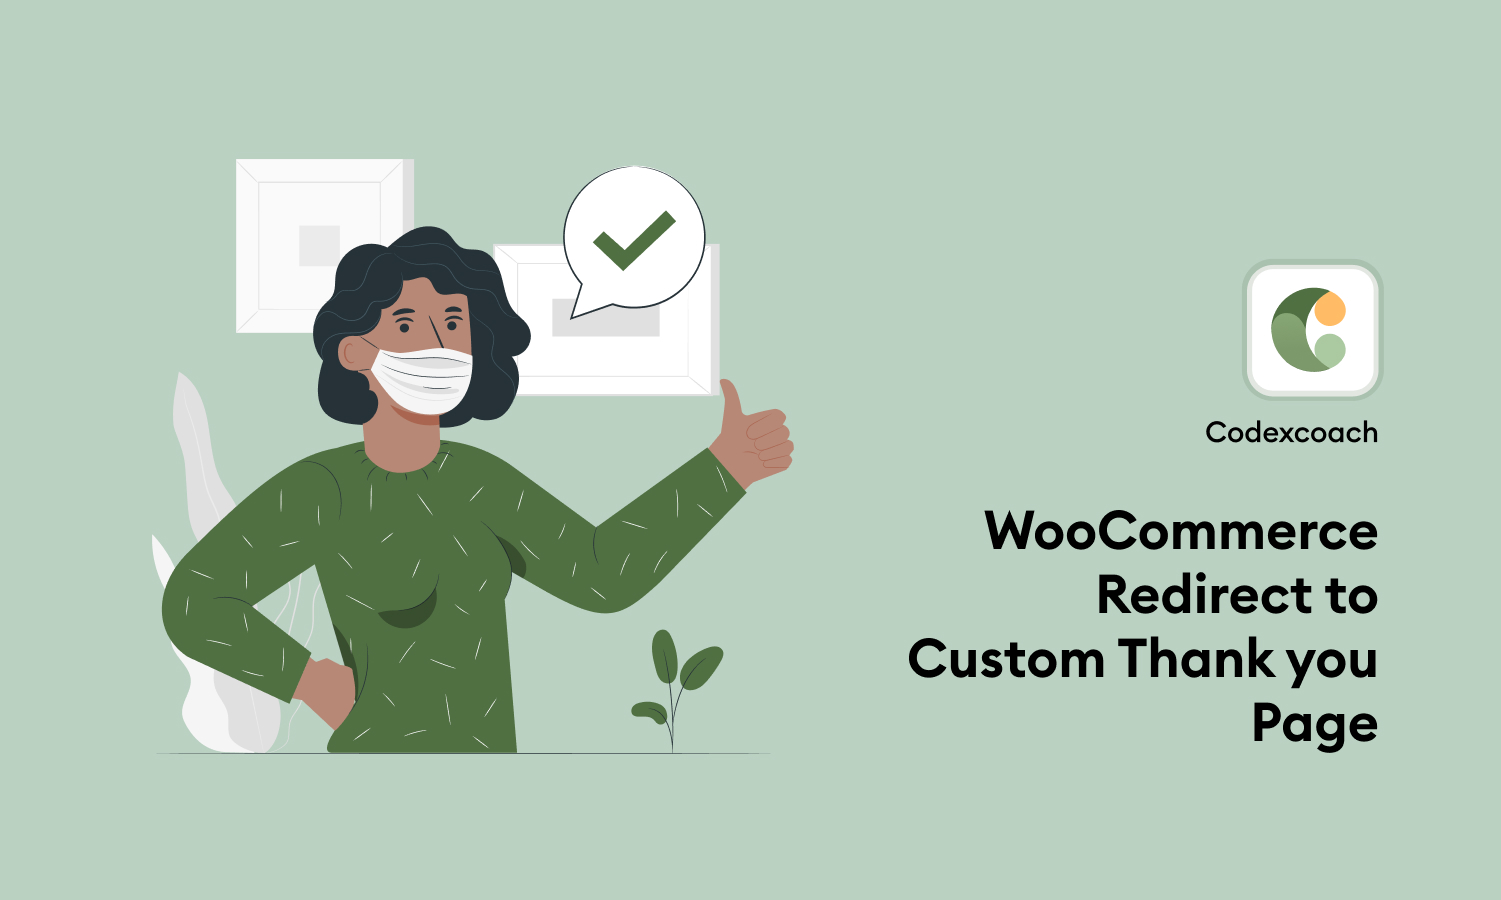 WooCommerce Redirect to Custom Thank you Page